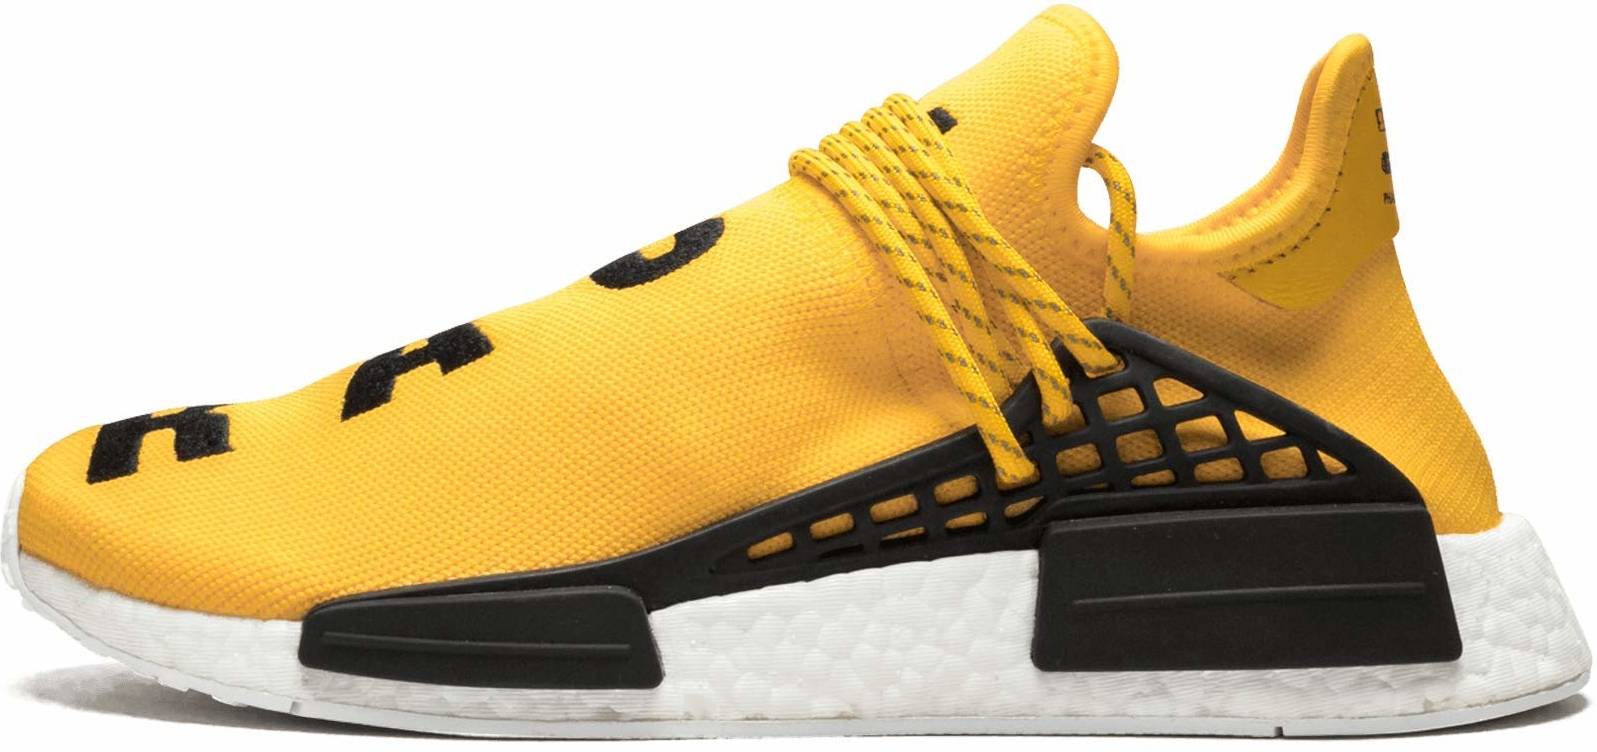 Adidas Pharrell Williams Human Race NMD Review, Facts, Comparison 